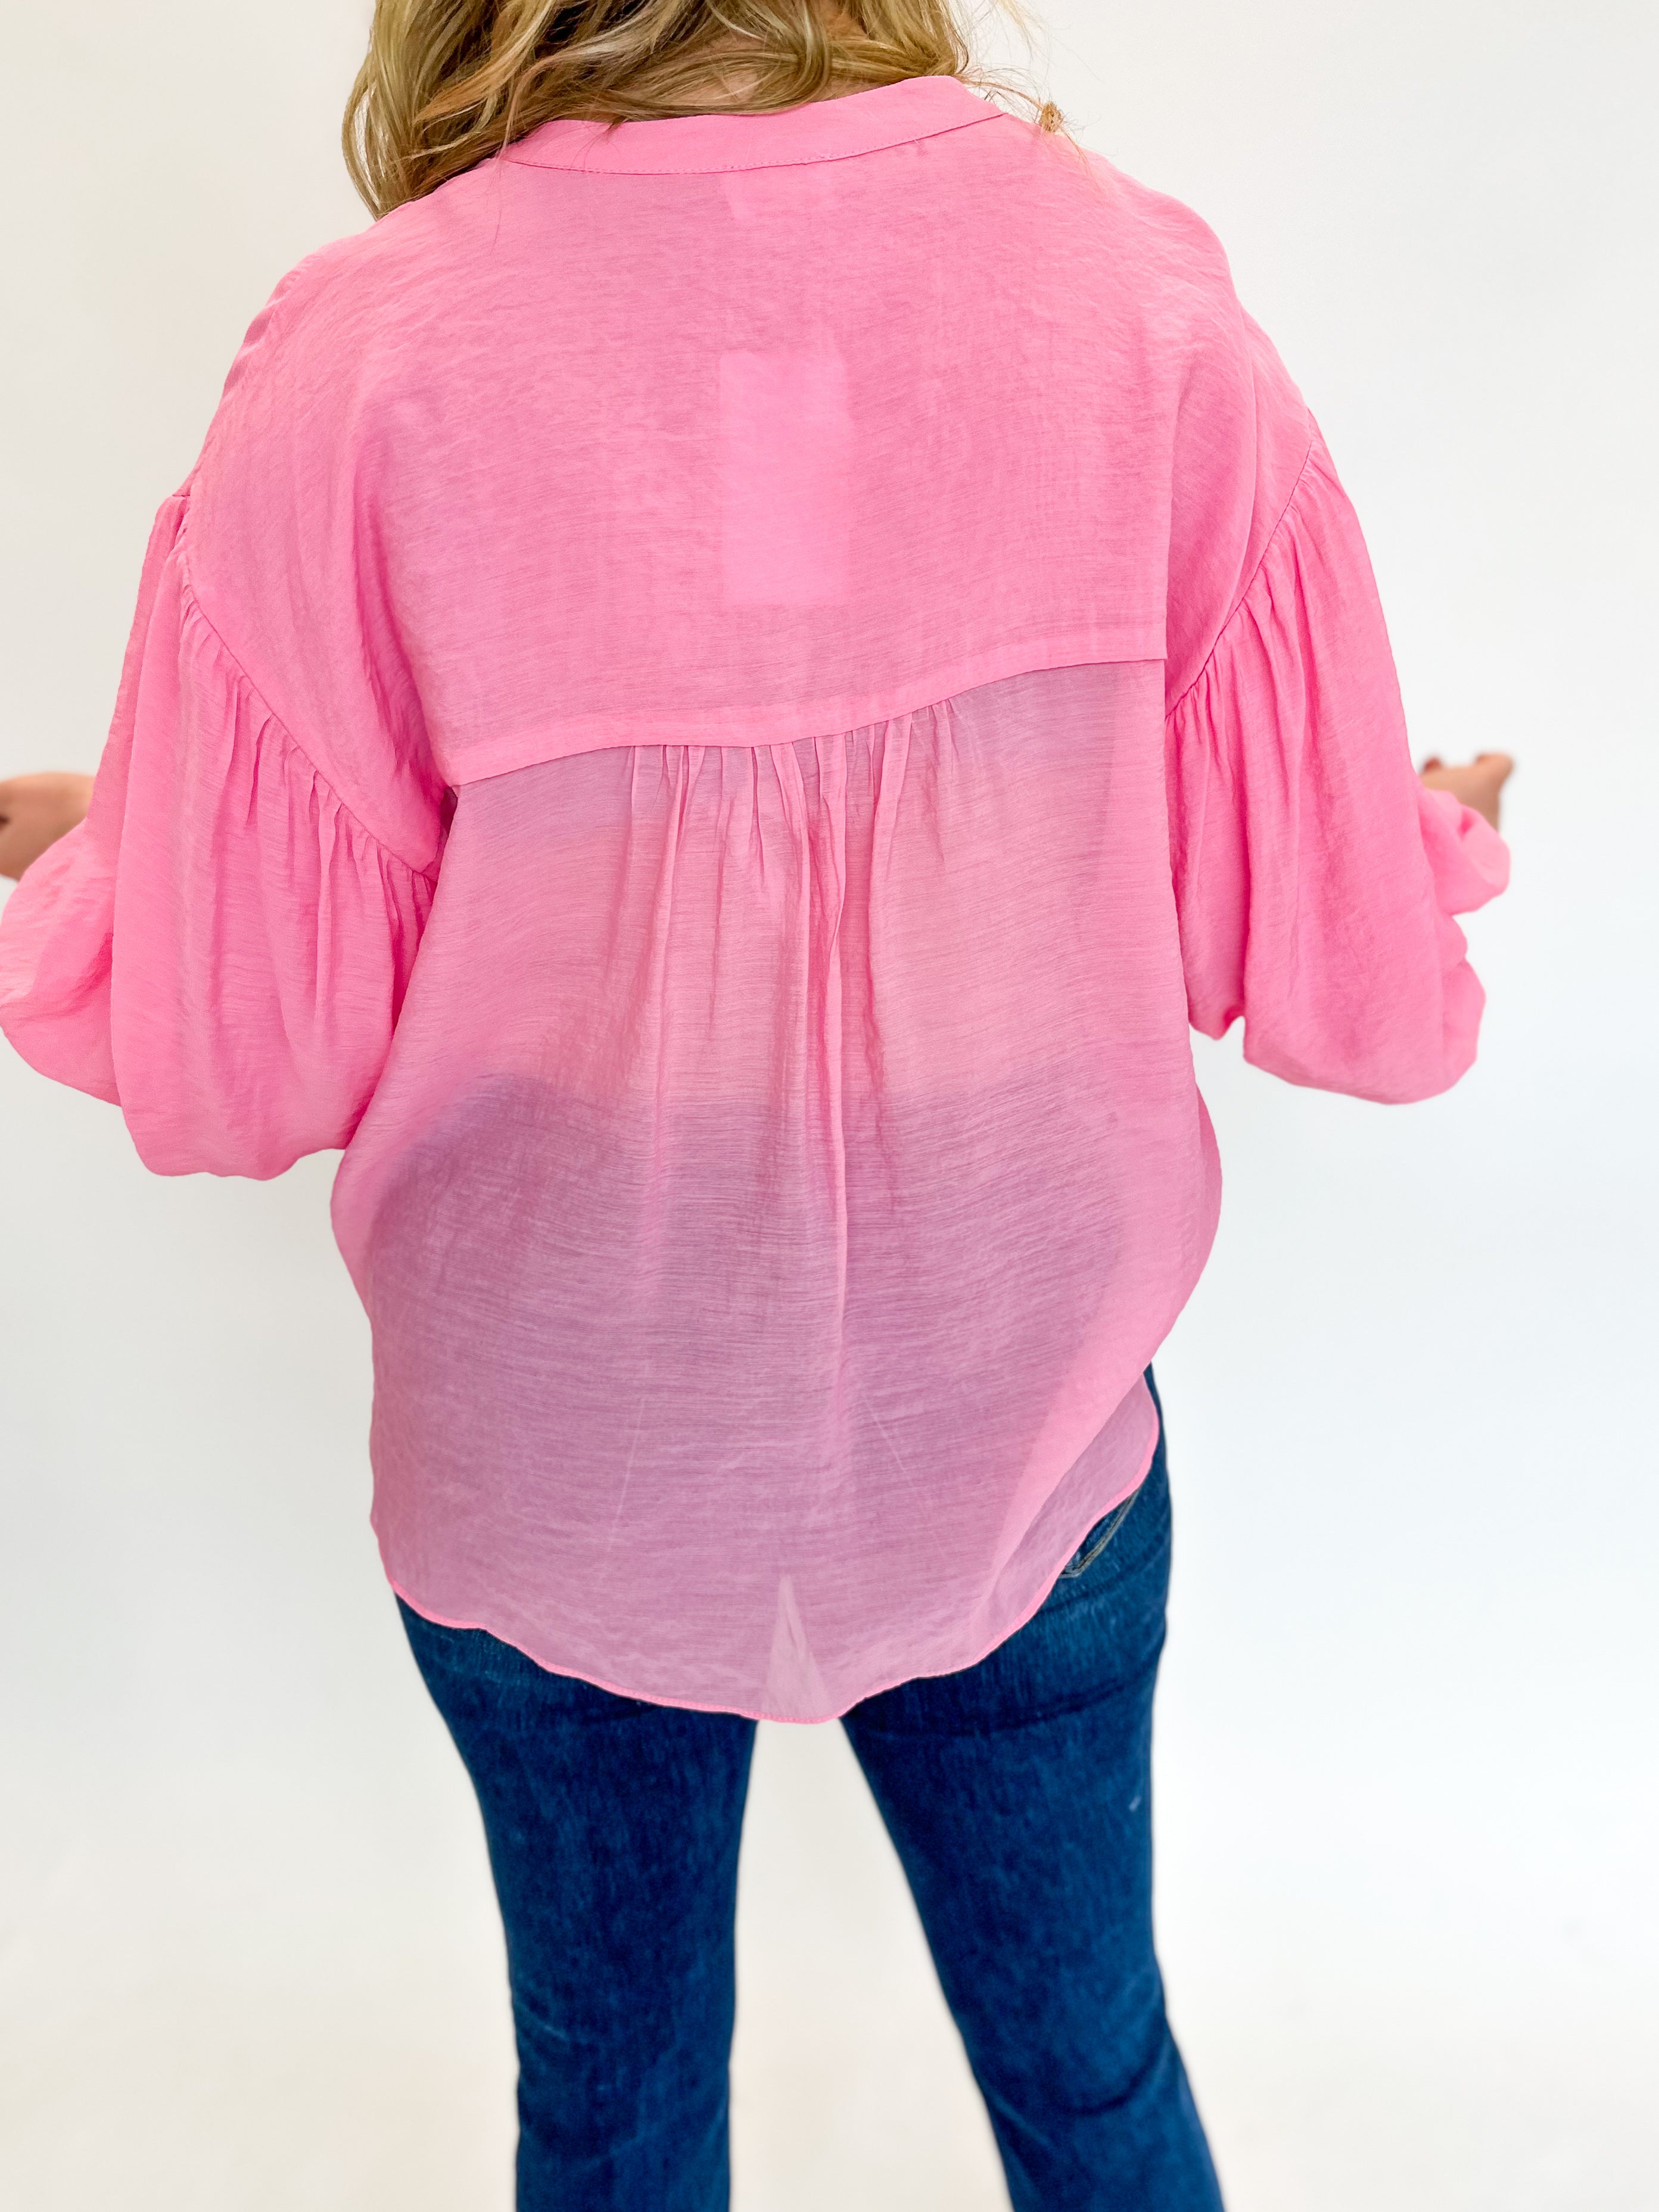 Classic Cut Blouse - Pink-200 Fashion Blouses-FATE-July & June Women's Fashion Boutique Located in San Antonio, Texas